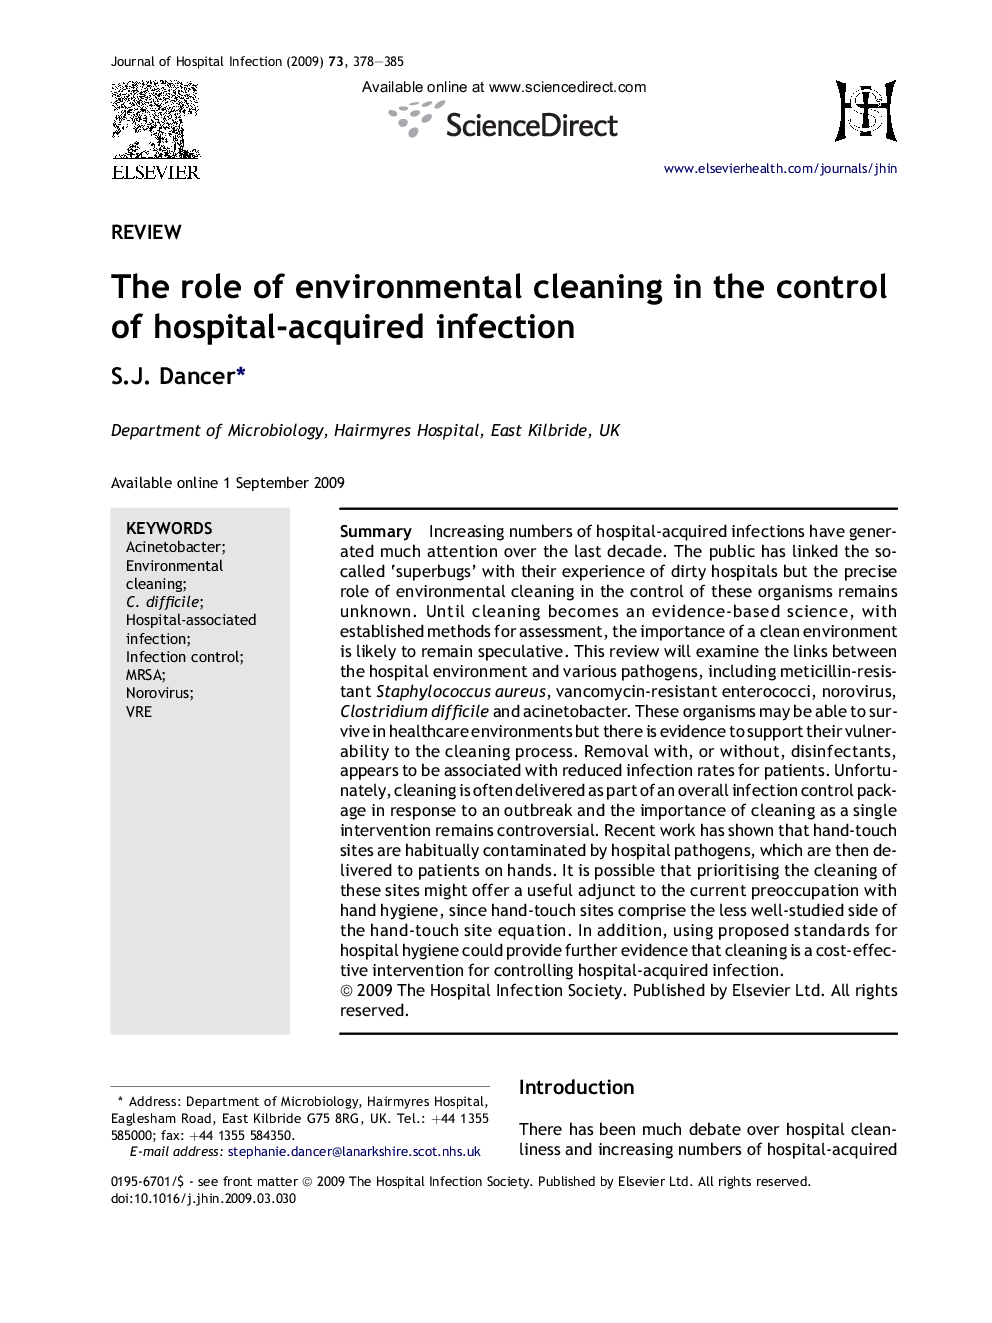 The role of environmental cleaning in the control of hospital-acquired infection